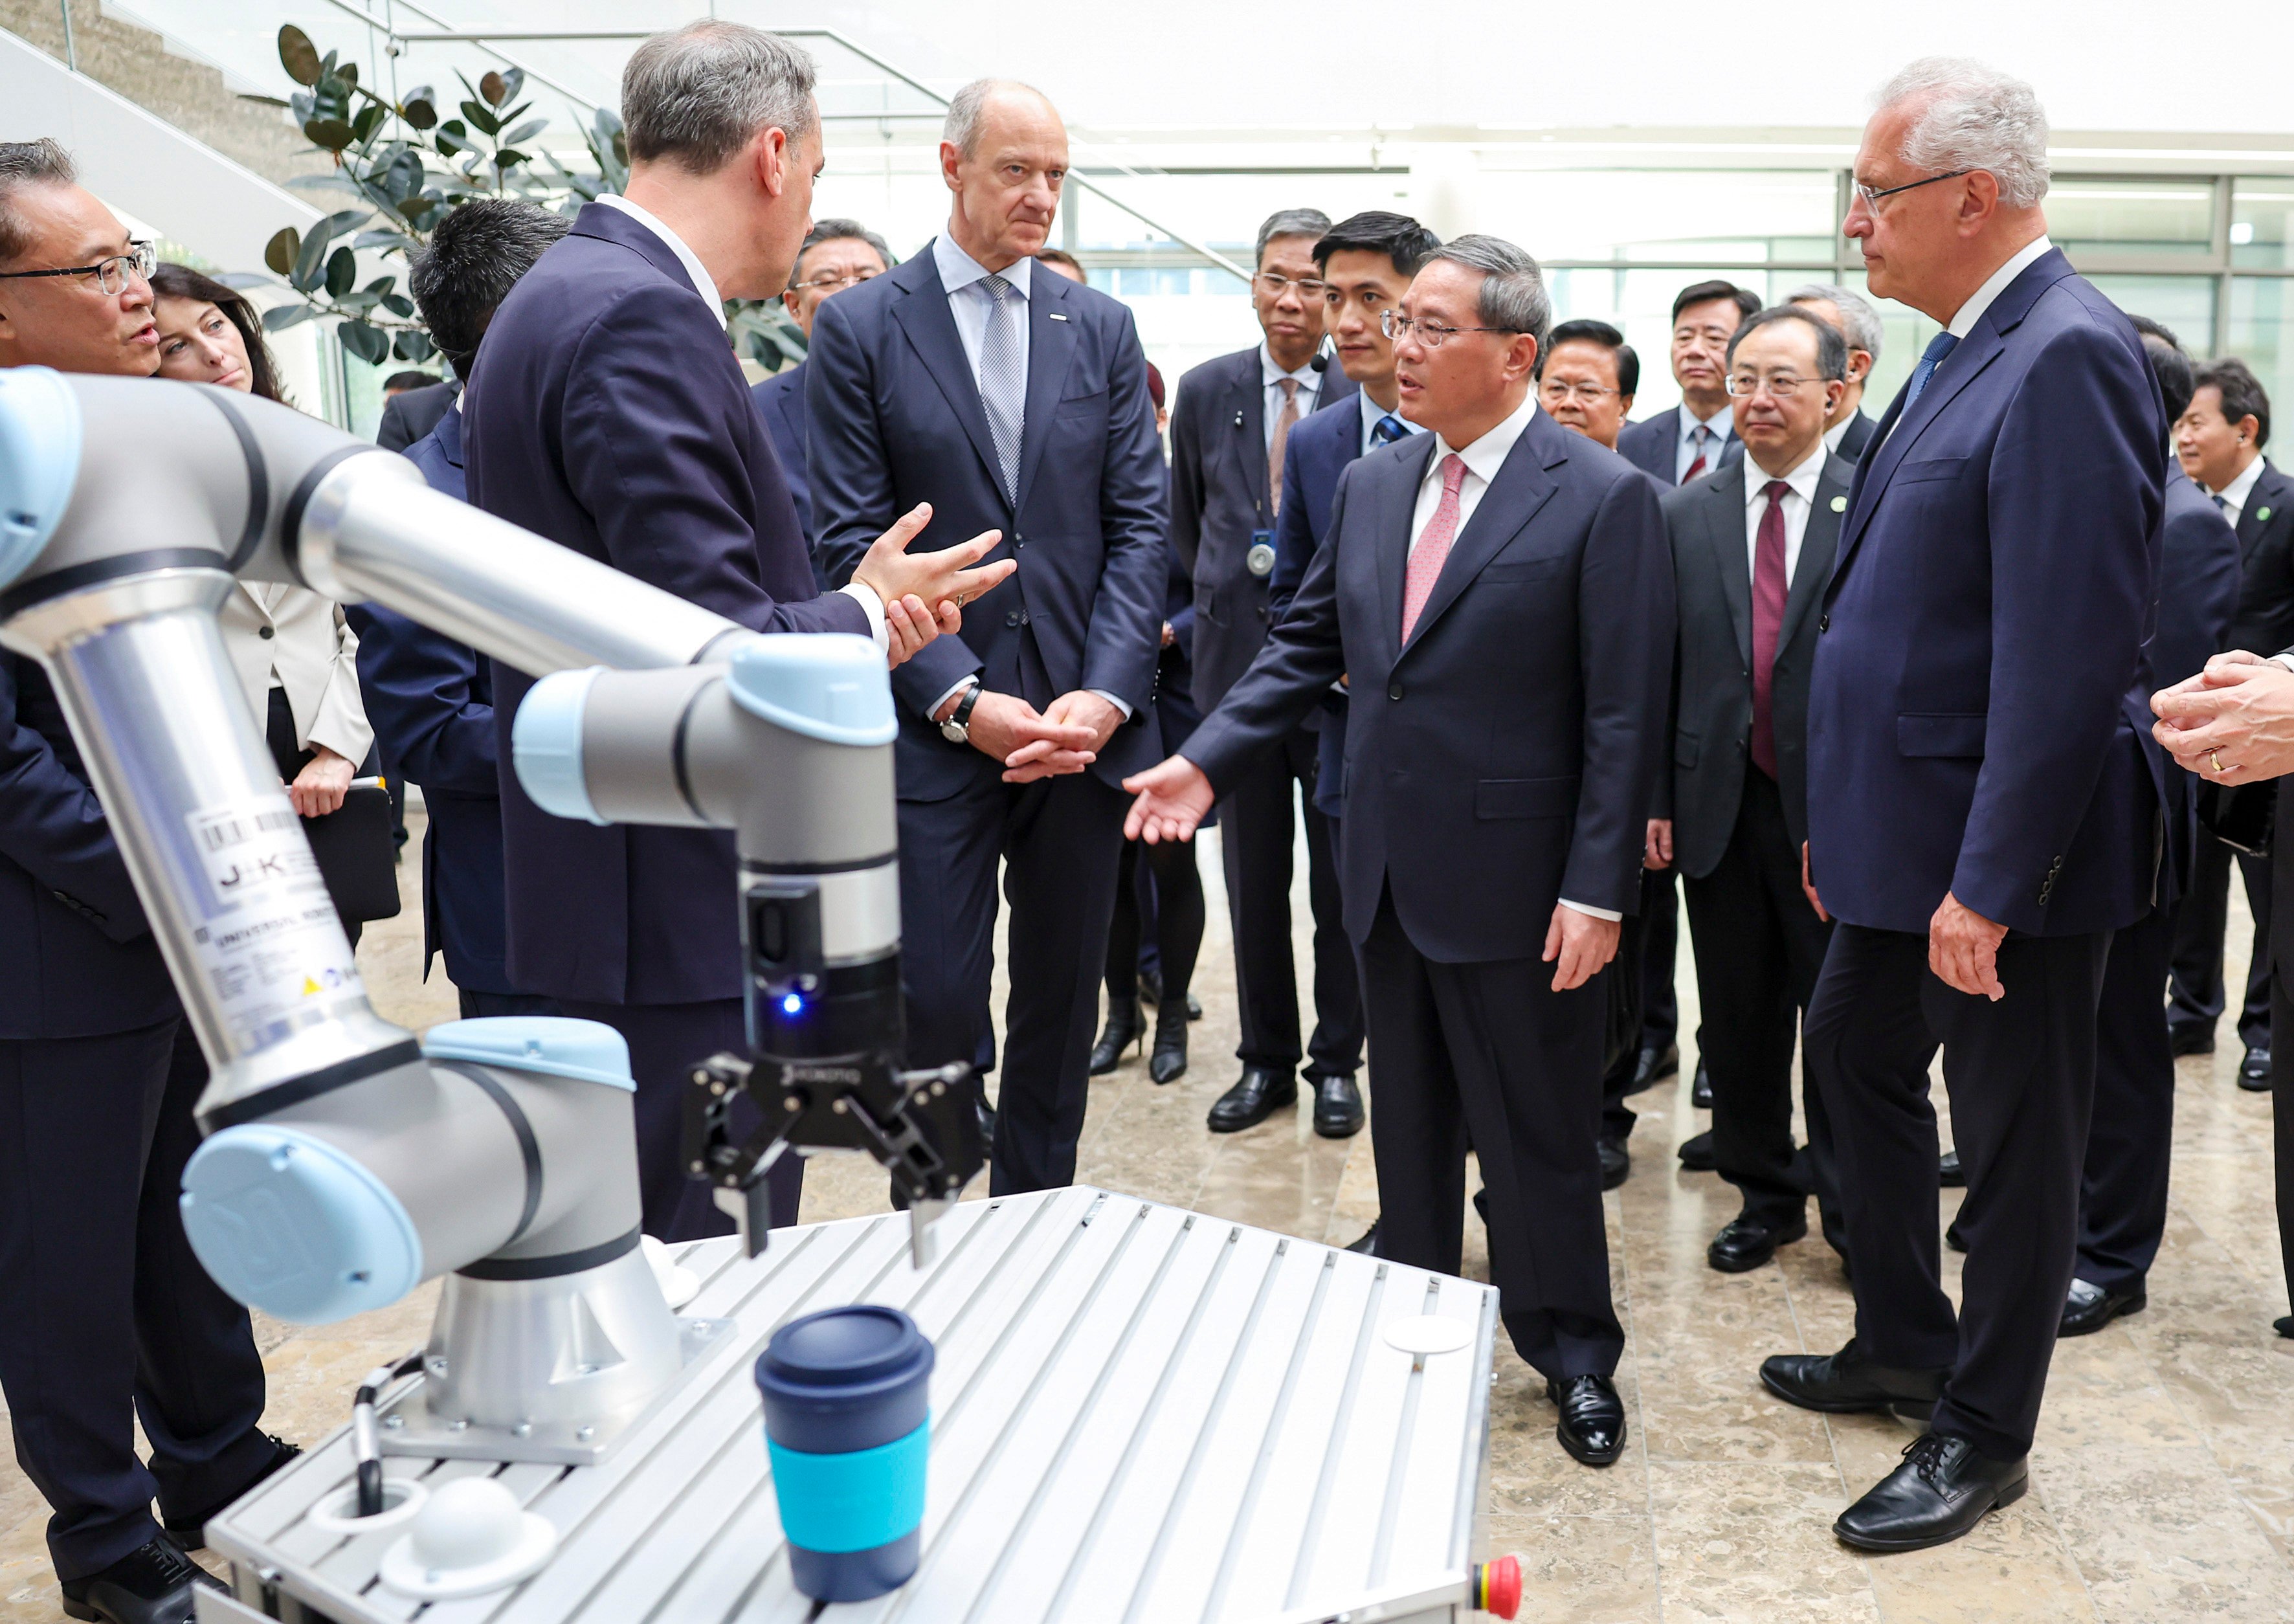 Chinese Premier Li Qiang visits the headquarters of Siemens in Germany’s Bavaria. Li repeated calls for greater “openness and cooperation” throughout his tour. Photo: Xinhua